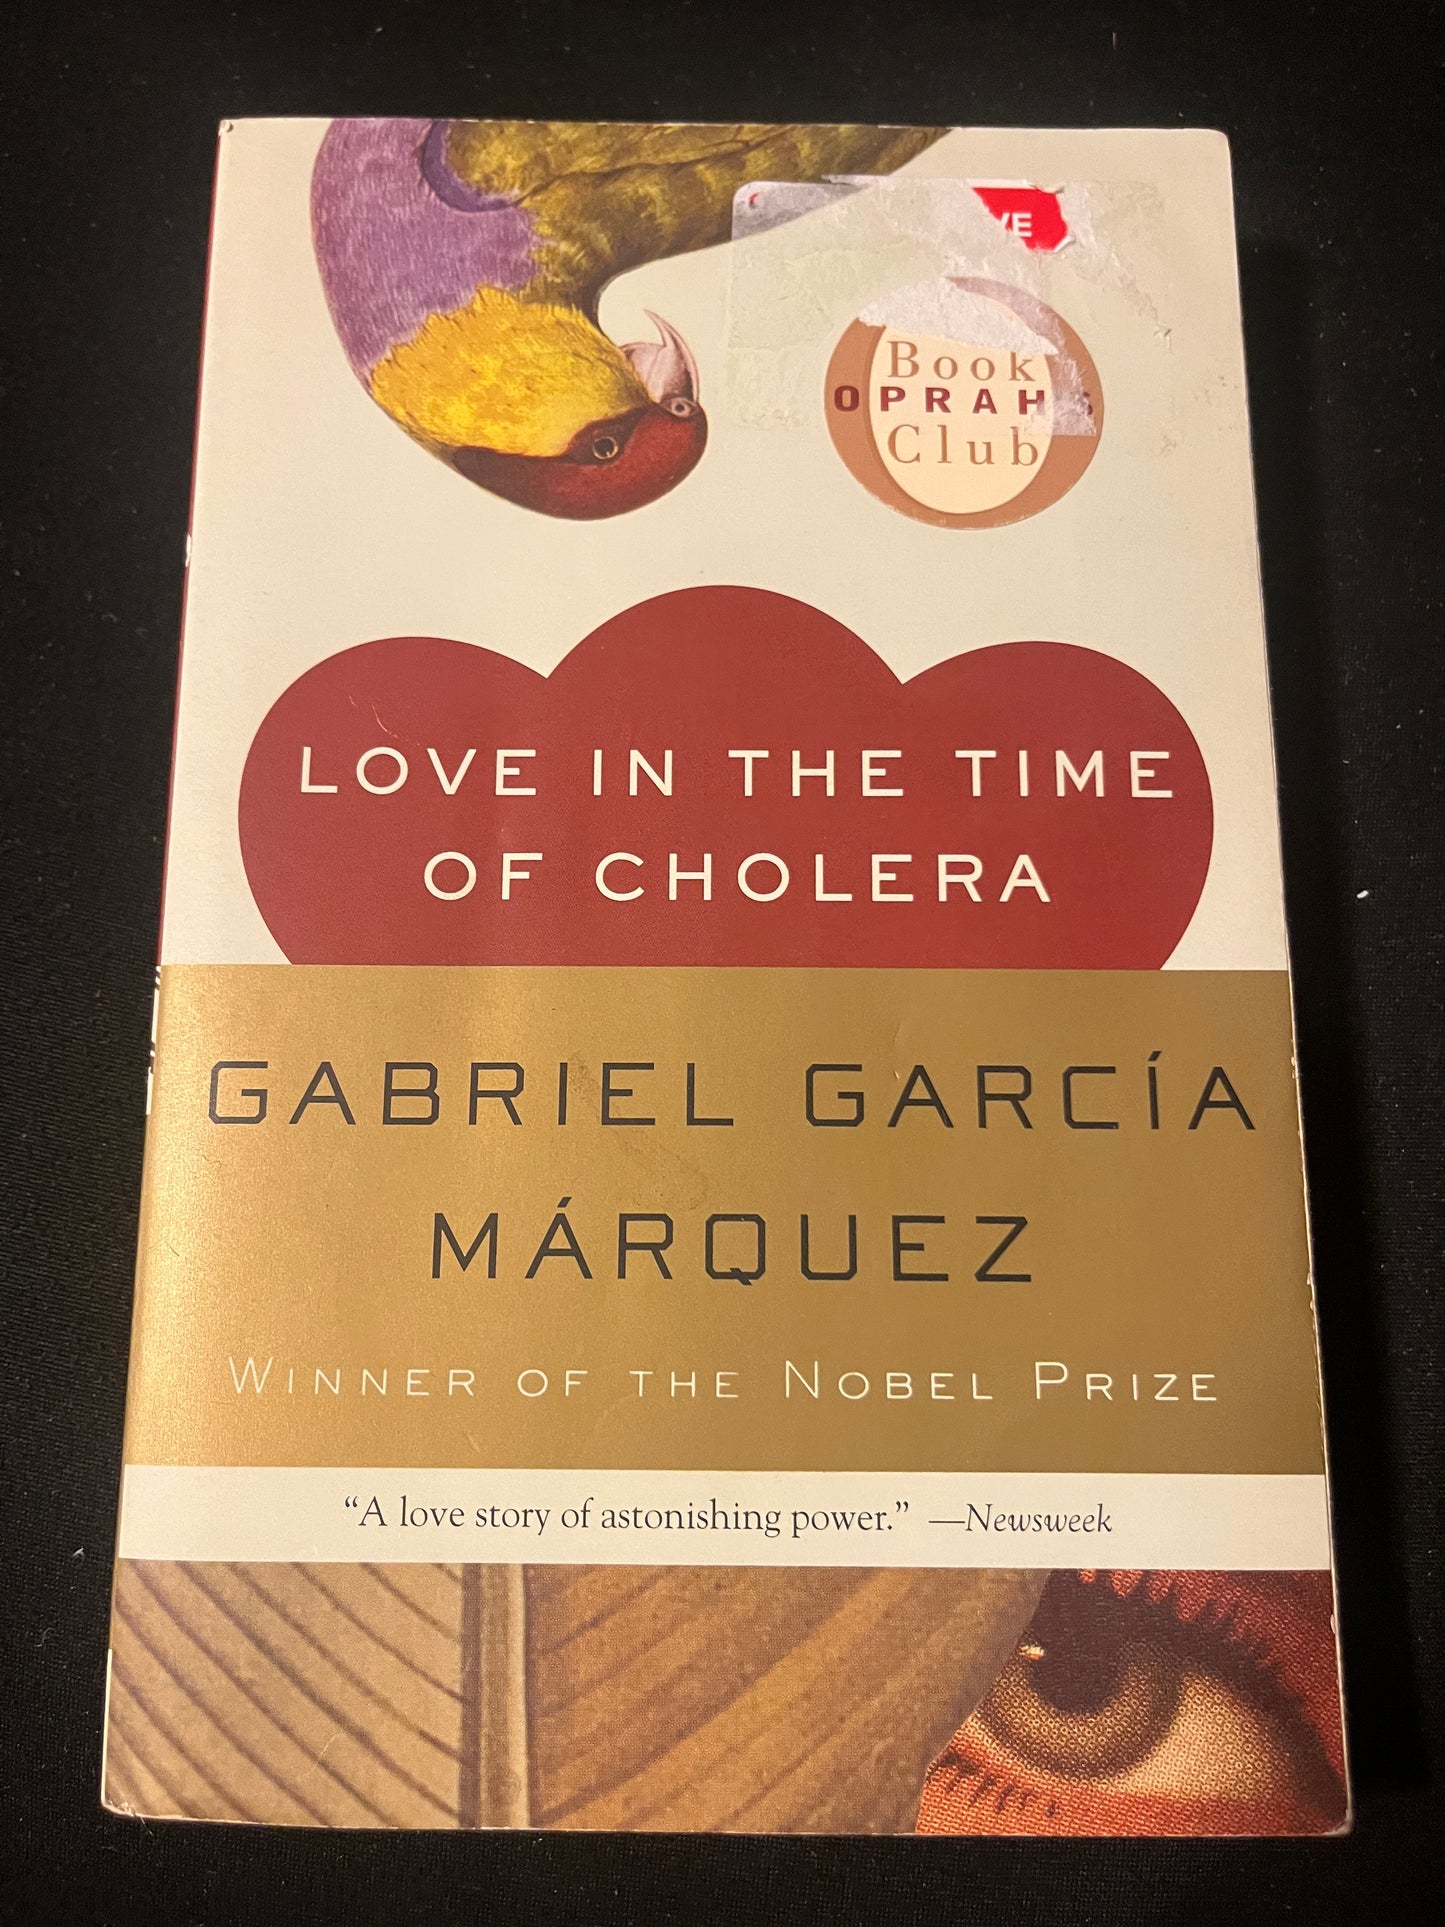 LOVE IN THE TIME OF CHOLERA by Gabriel Garcia Marquez